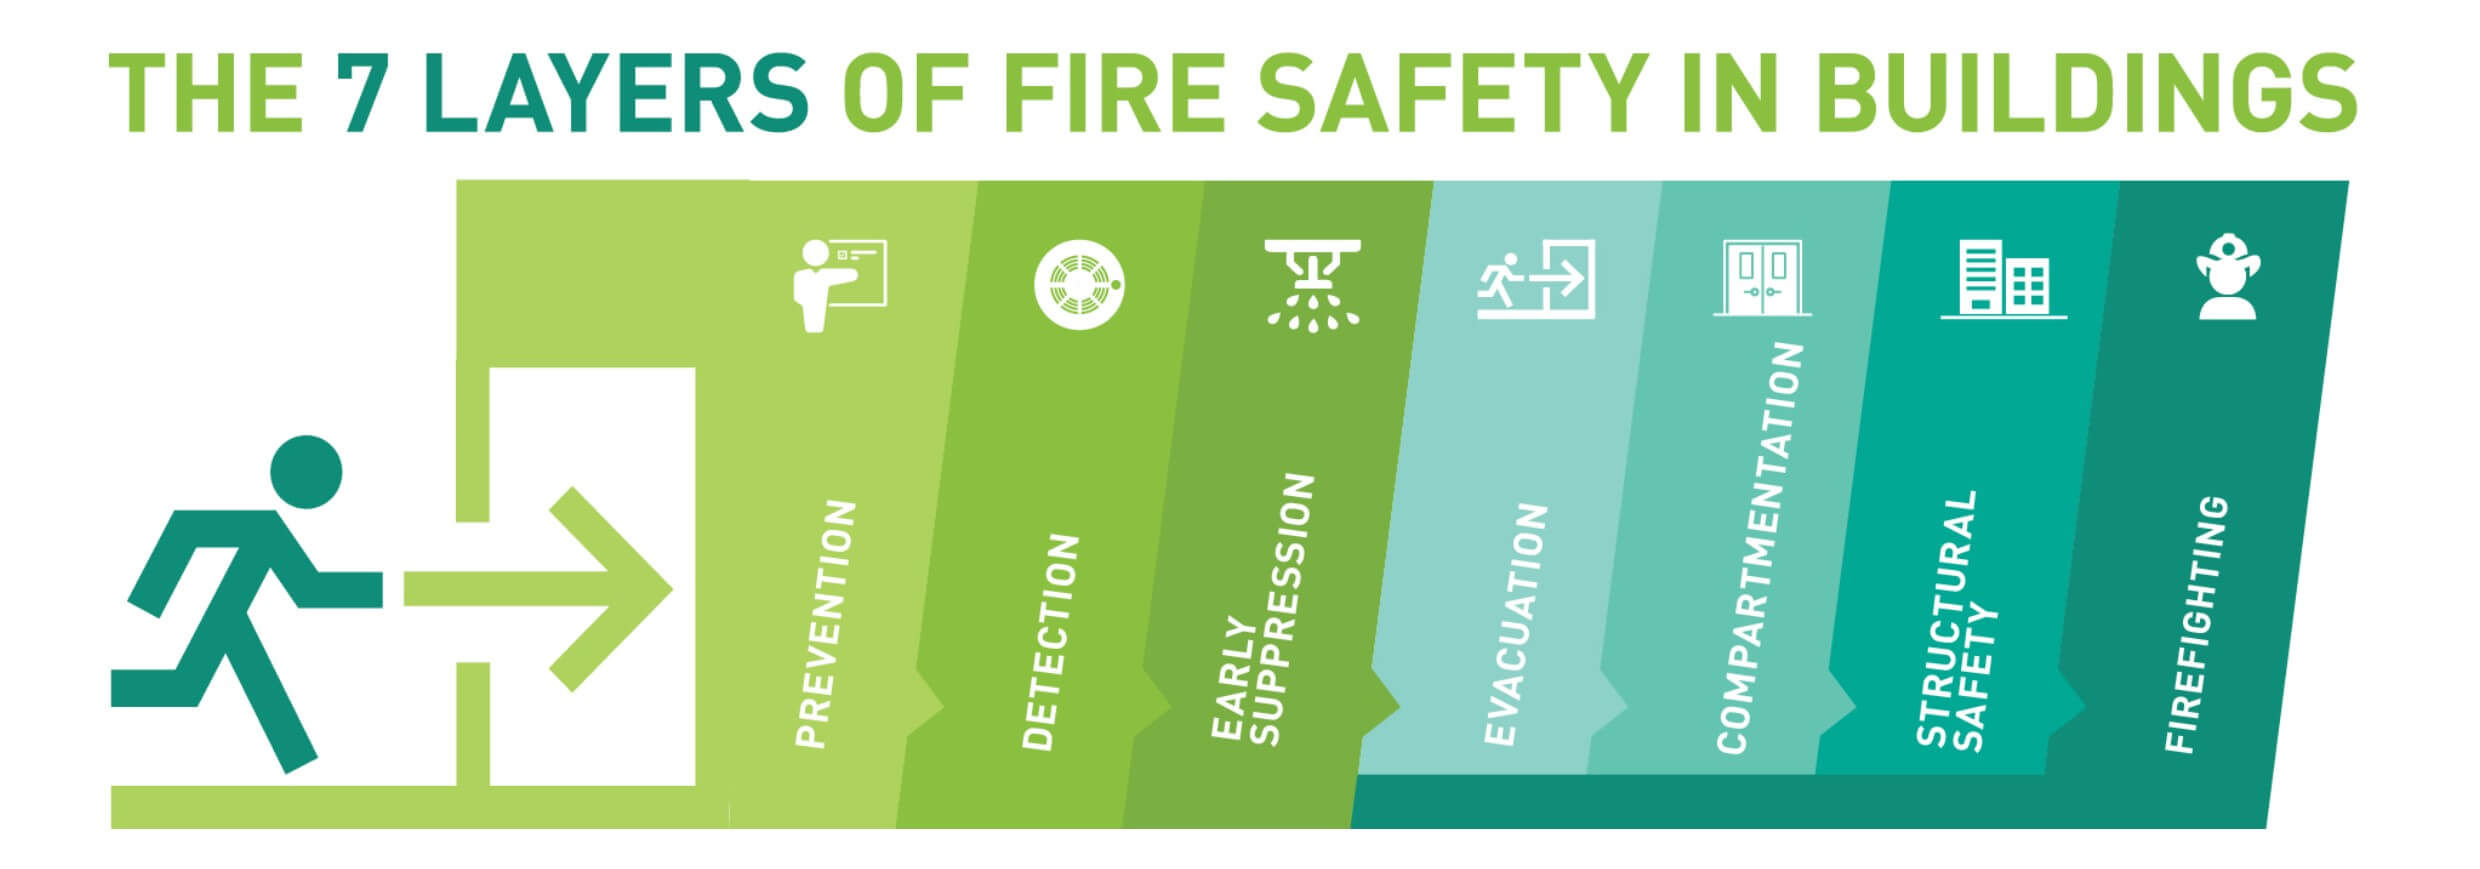 The 7 layers of fire safety in buildings